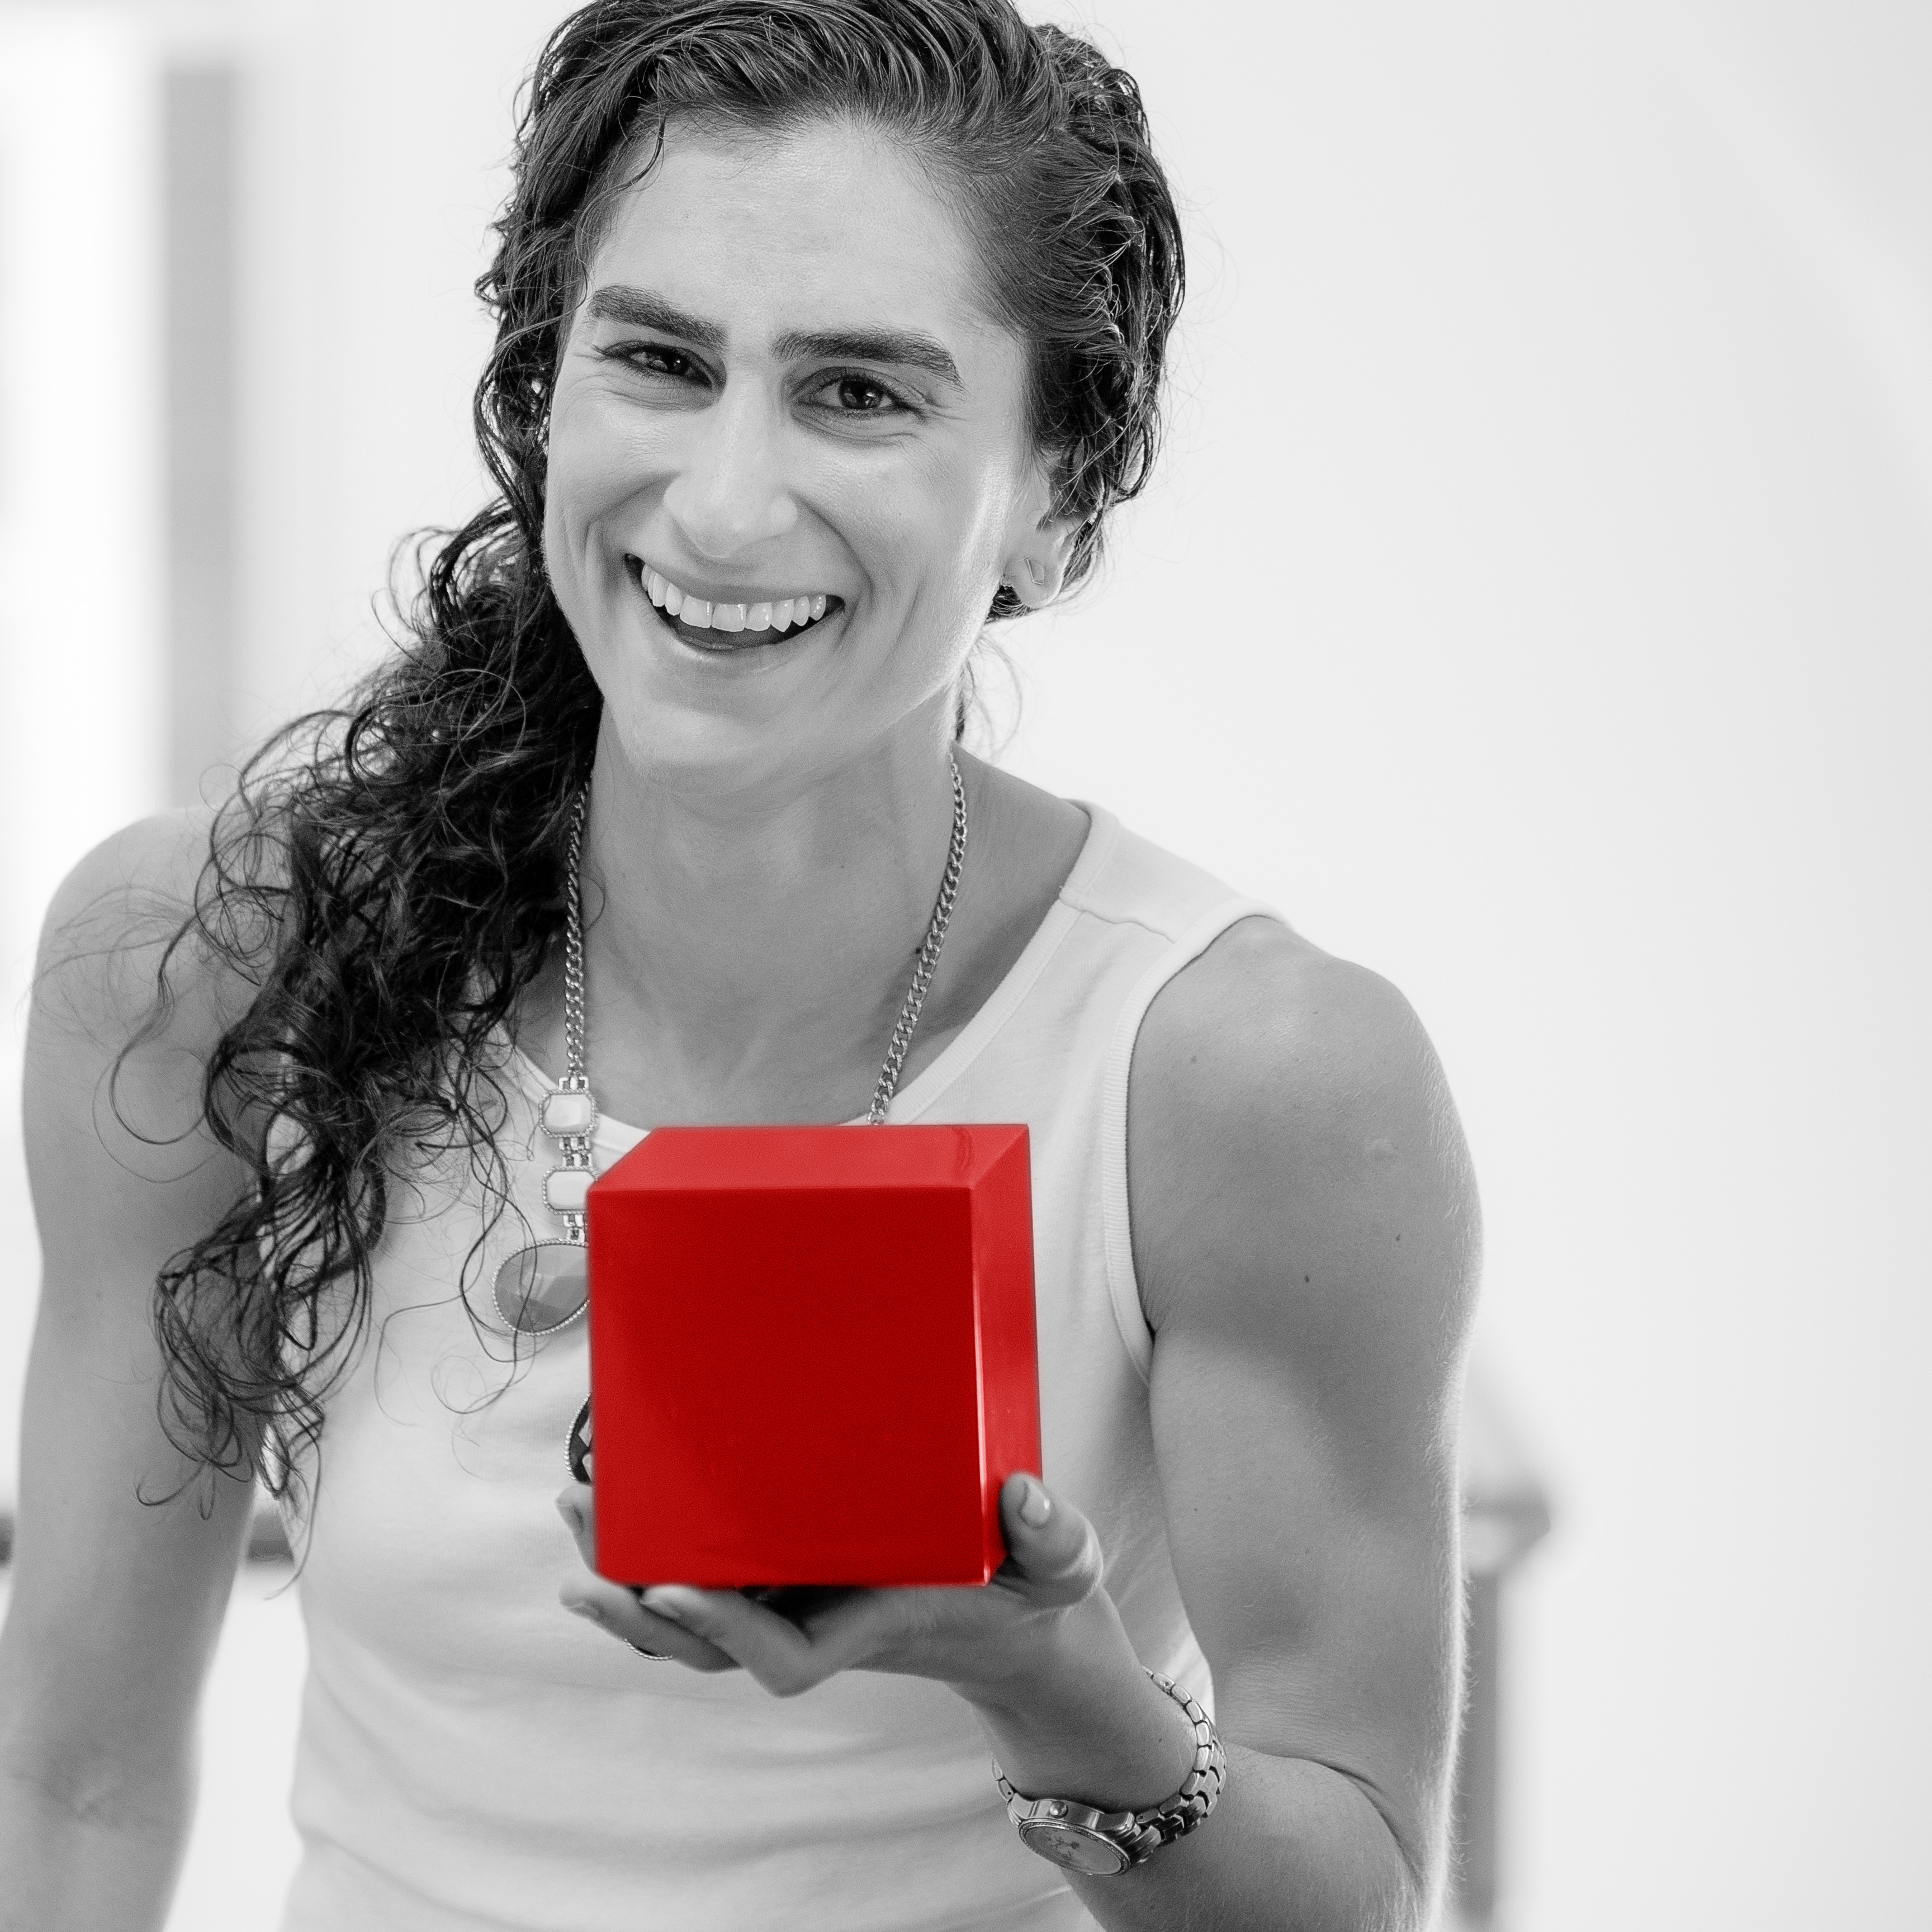 Samar T Pants smiling in black and white while holding a bright red cube